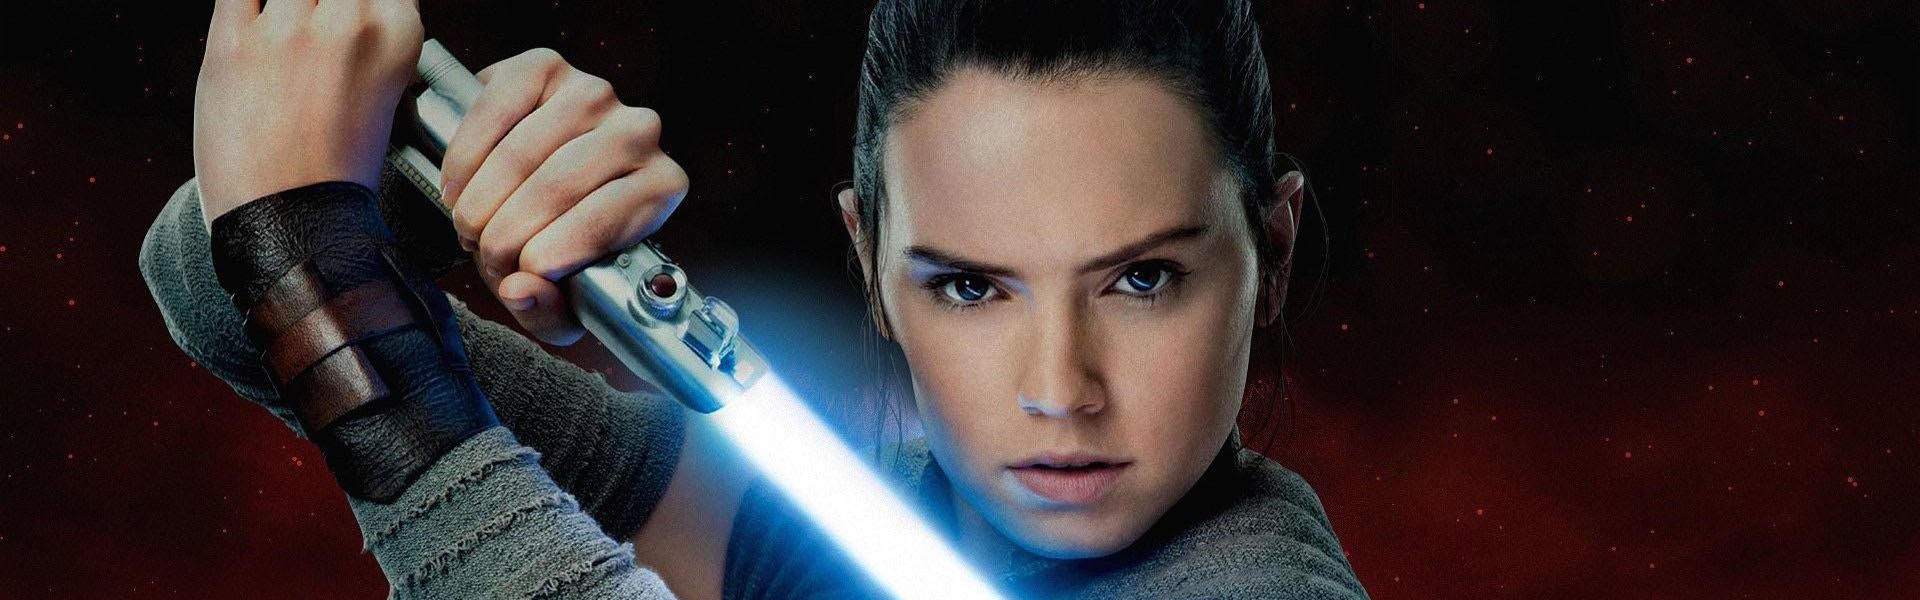 “Star Wars.” The film is in disarray, and Daisy Ridley gets hefty millions for her return as Rey Skywalker